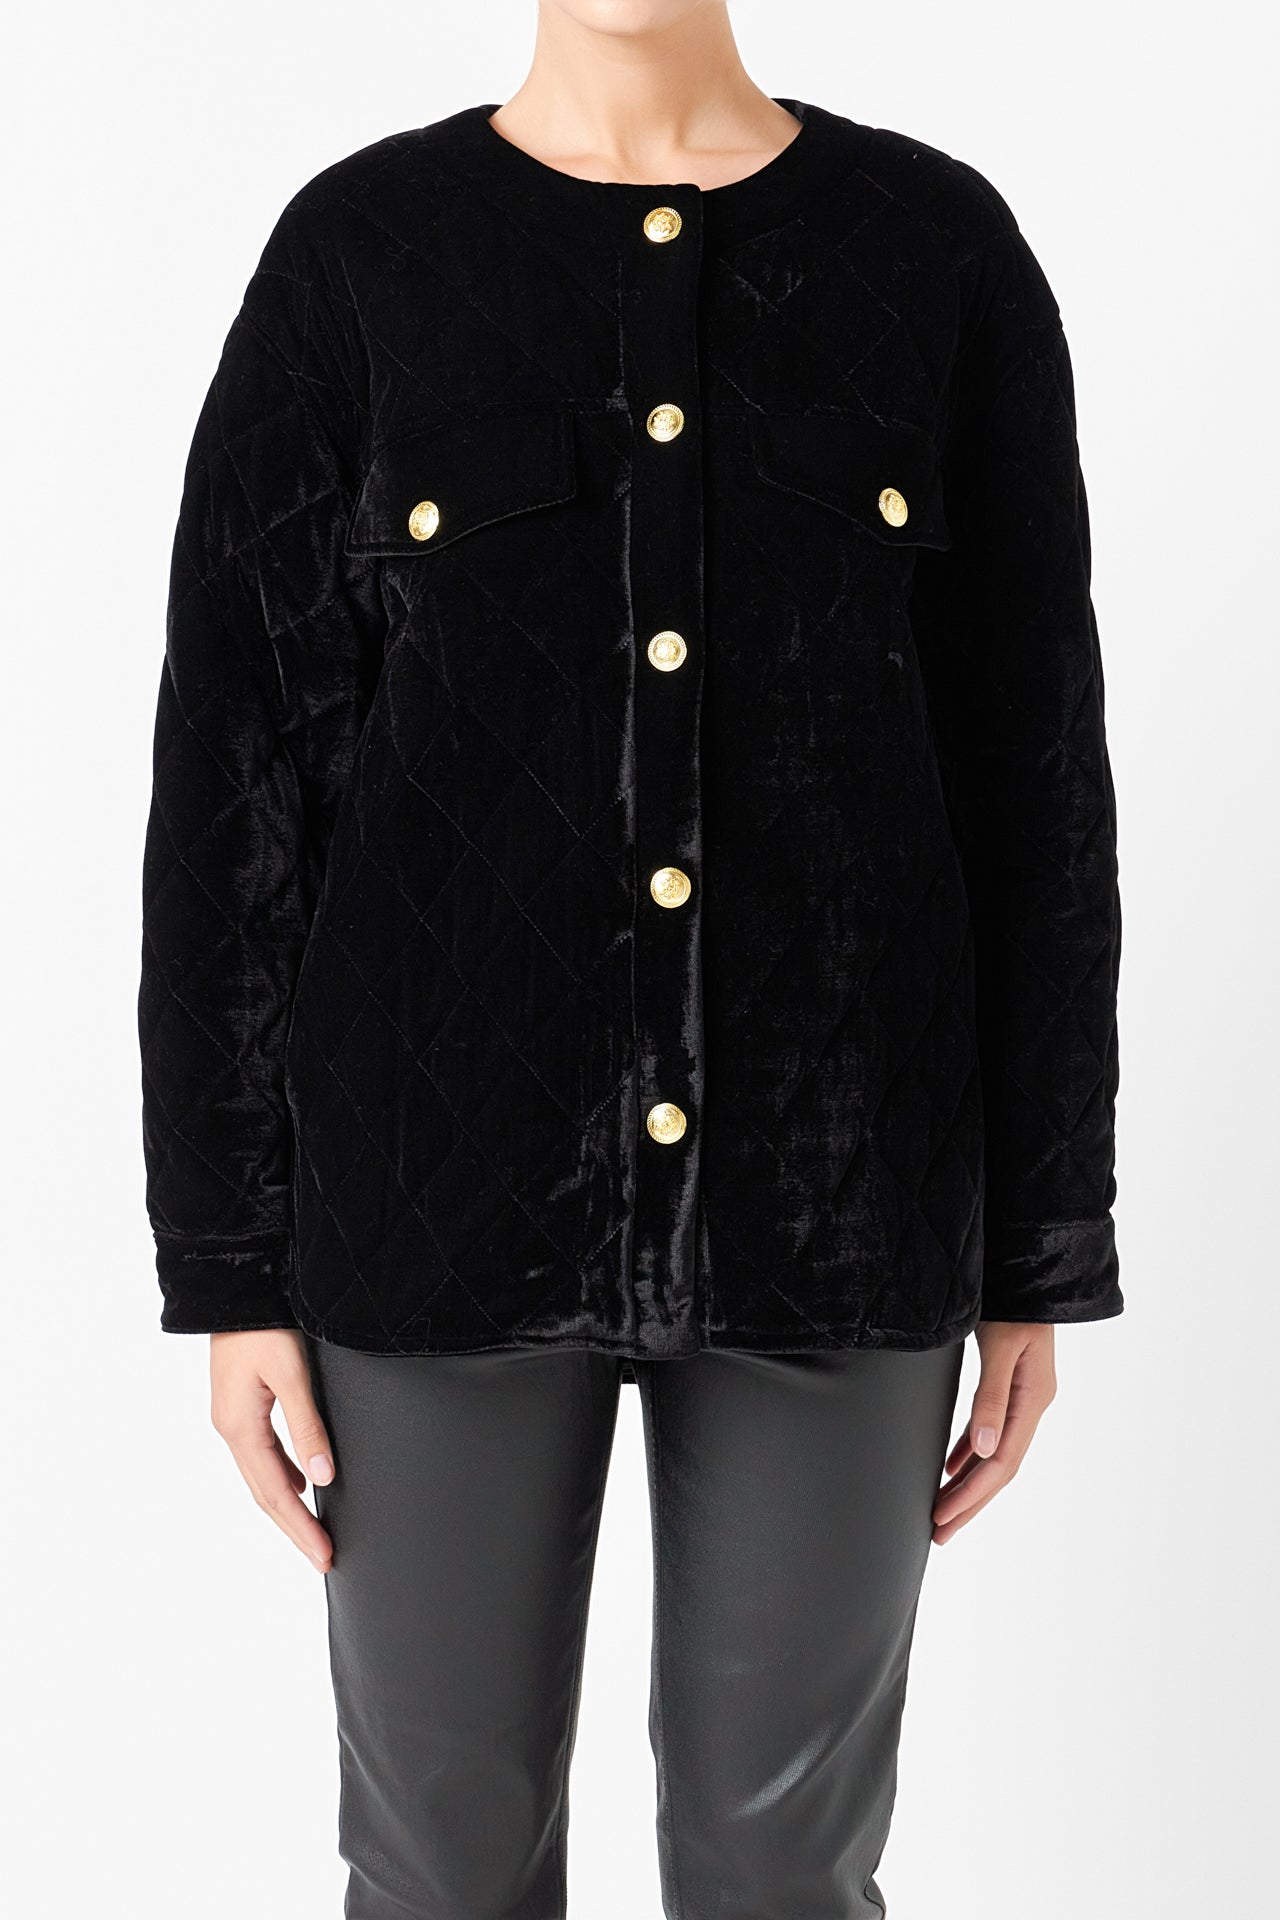 Endless Rose - Premium Oversized Quilted Velvet Jacket - Jackets in Women's Clothing available at endlessrose.com